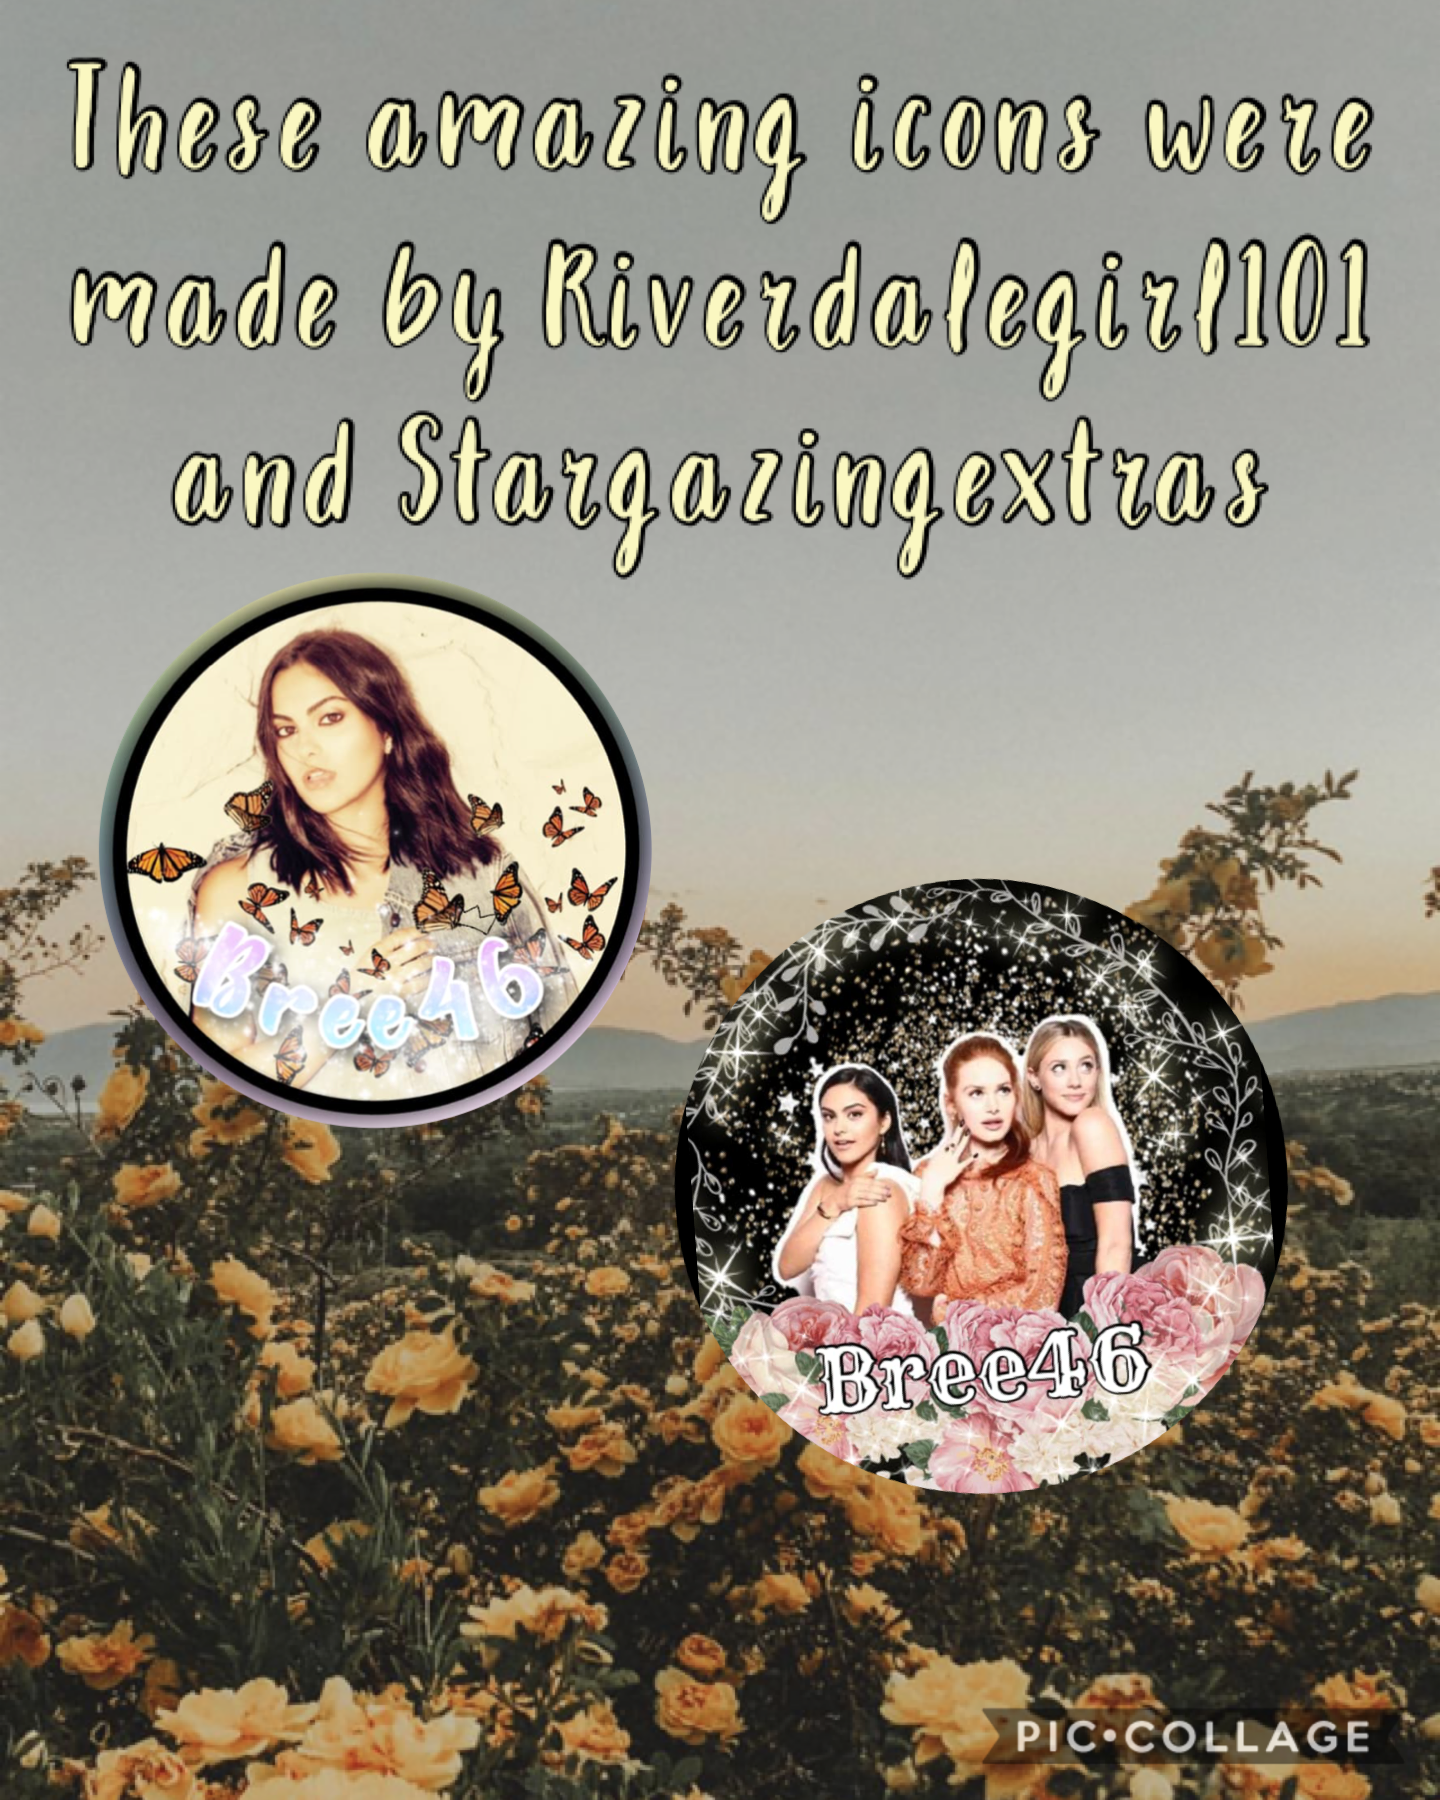 These amazing icons were made by the amazing Riverdalegirl101 and stargazingextras